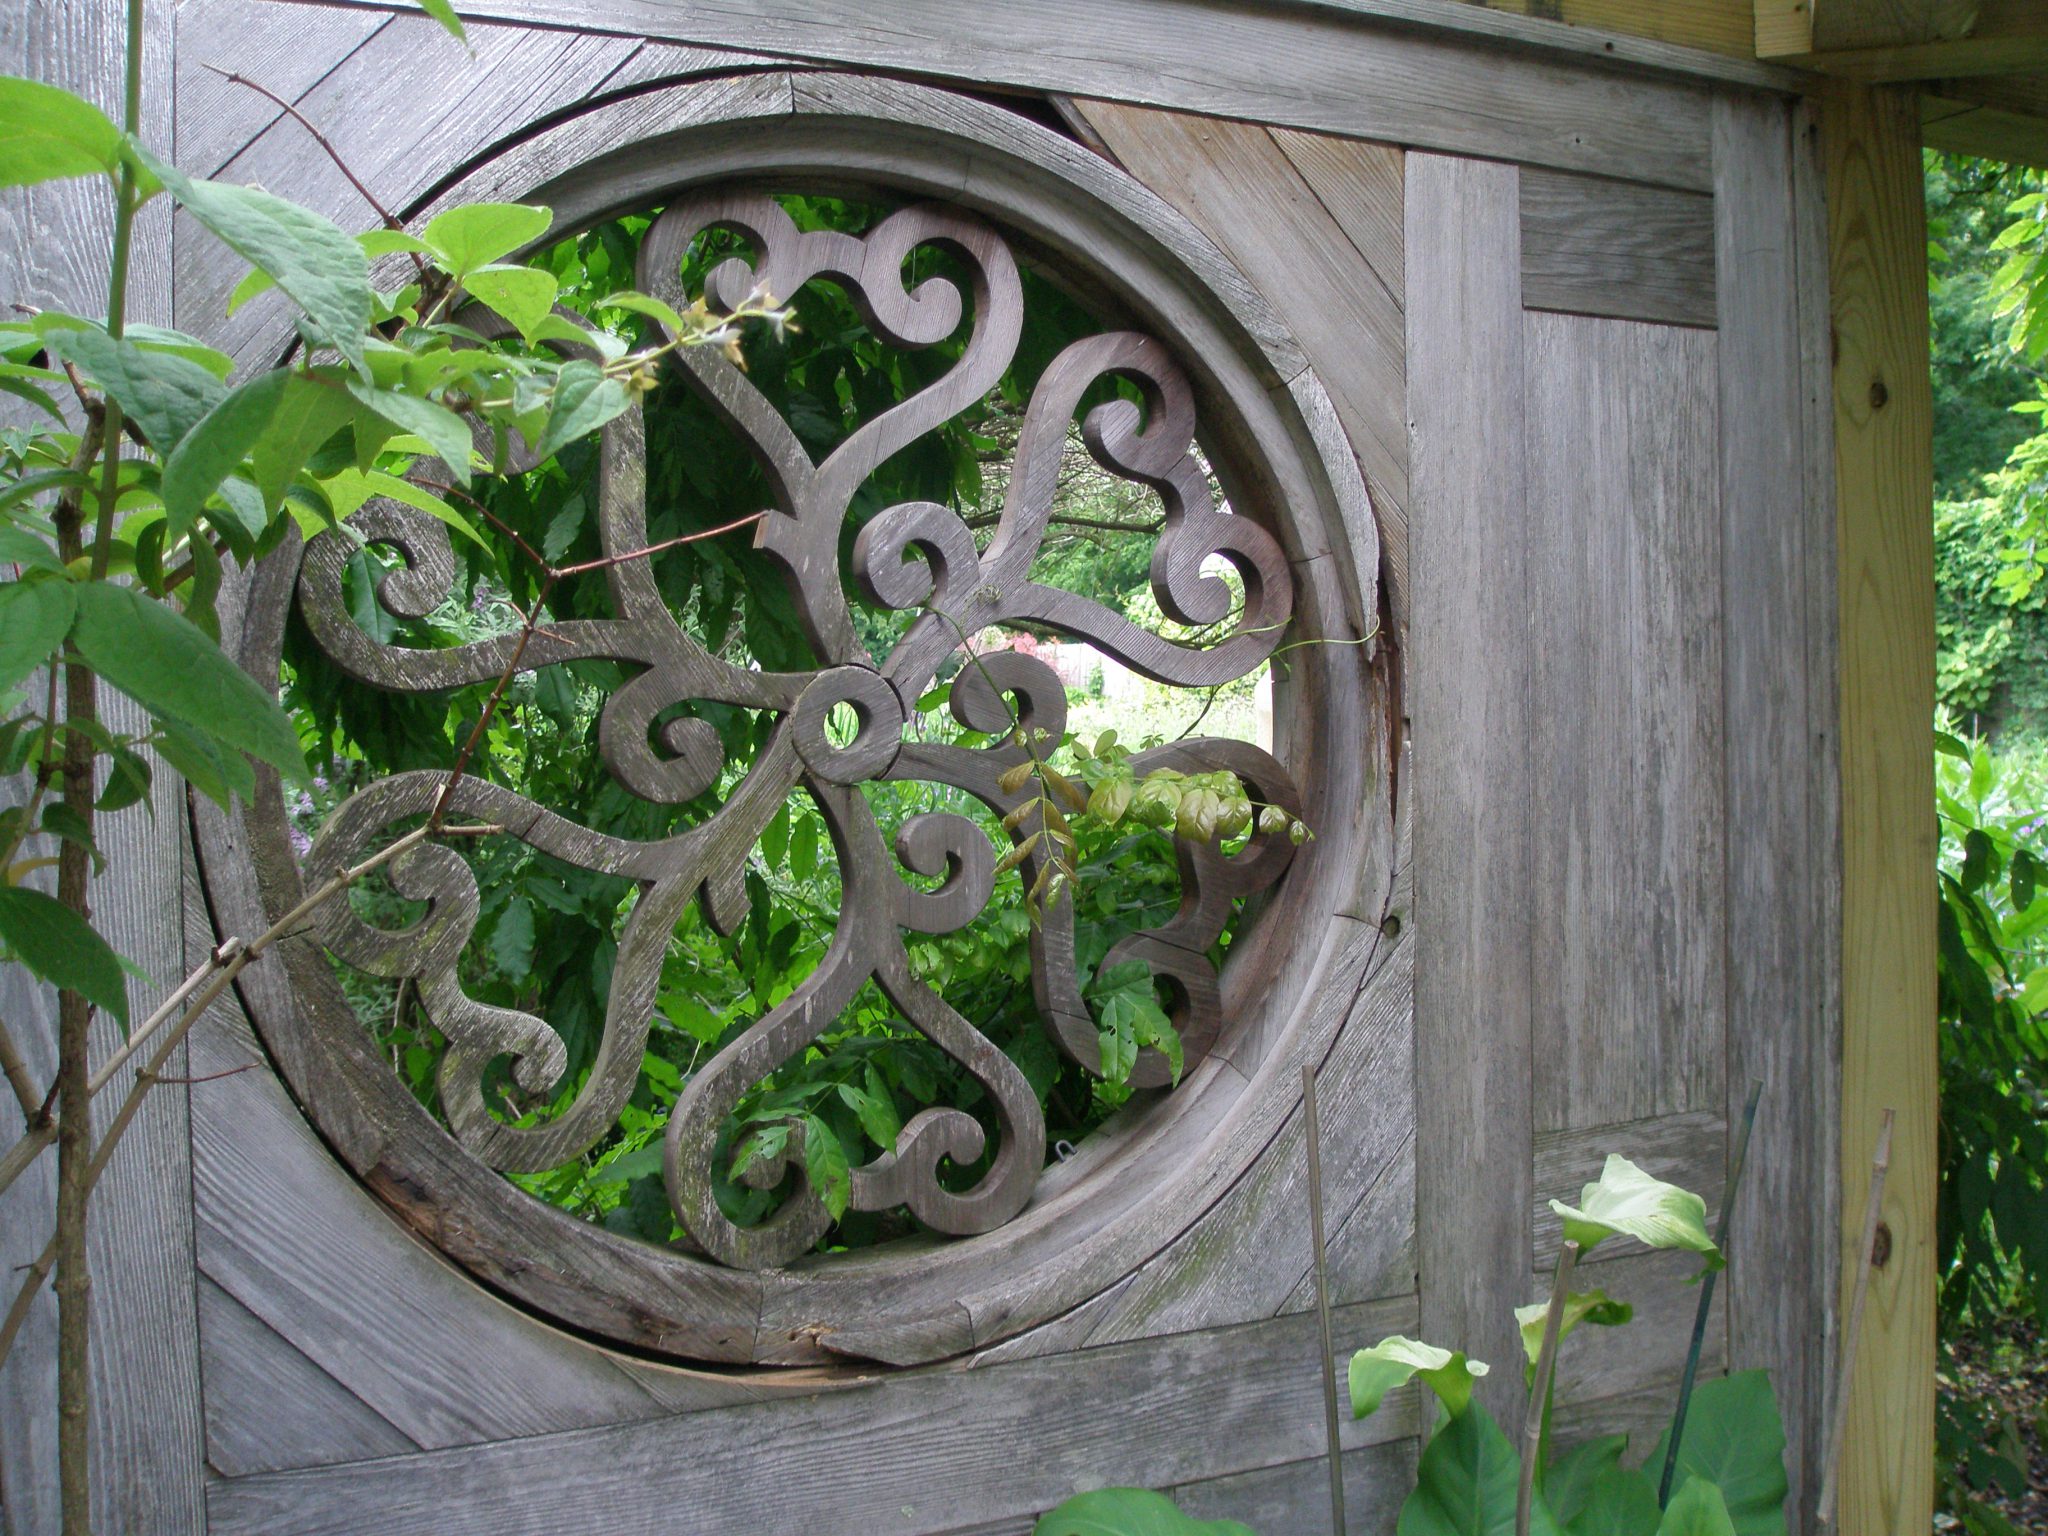 CLAIR VOIE: a grille set into a wall, which allows a "clear view" of the Enclosed Flower Garden.